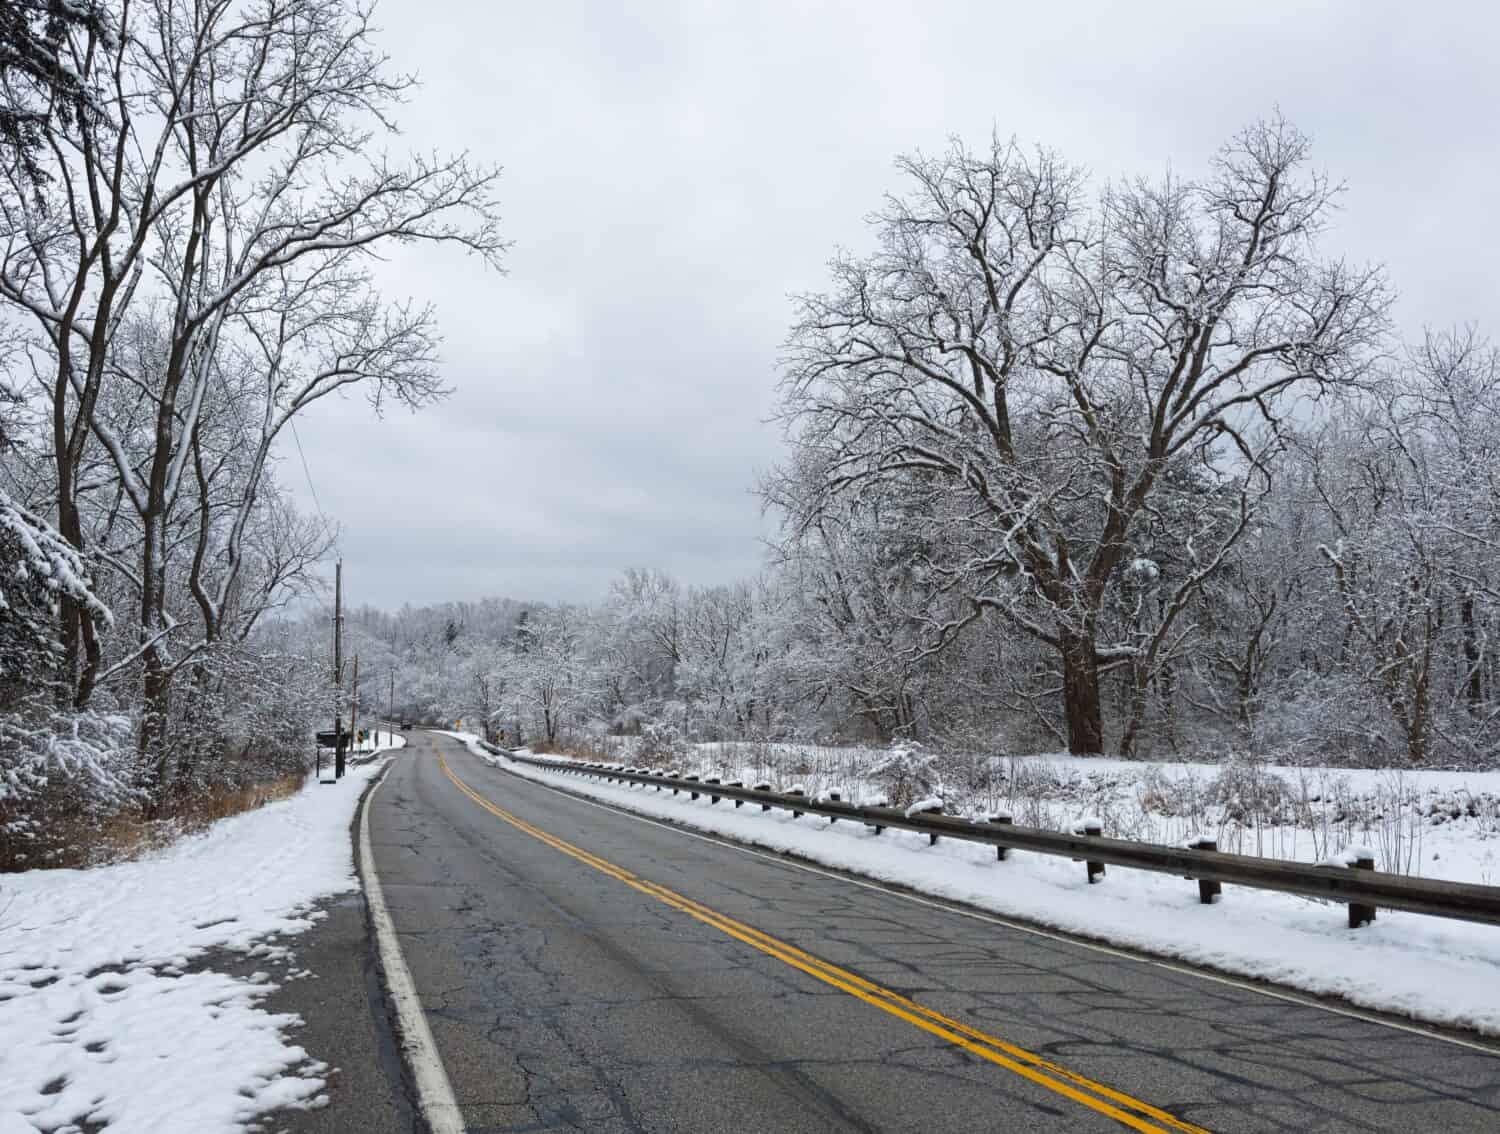 A road in Ohio's Cuyahoga Valley near Cleveland runs through a wintry landscape after freshly fallen snow